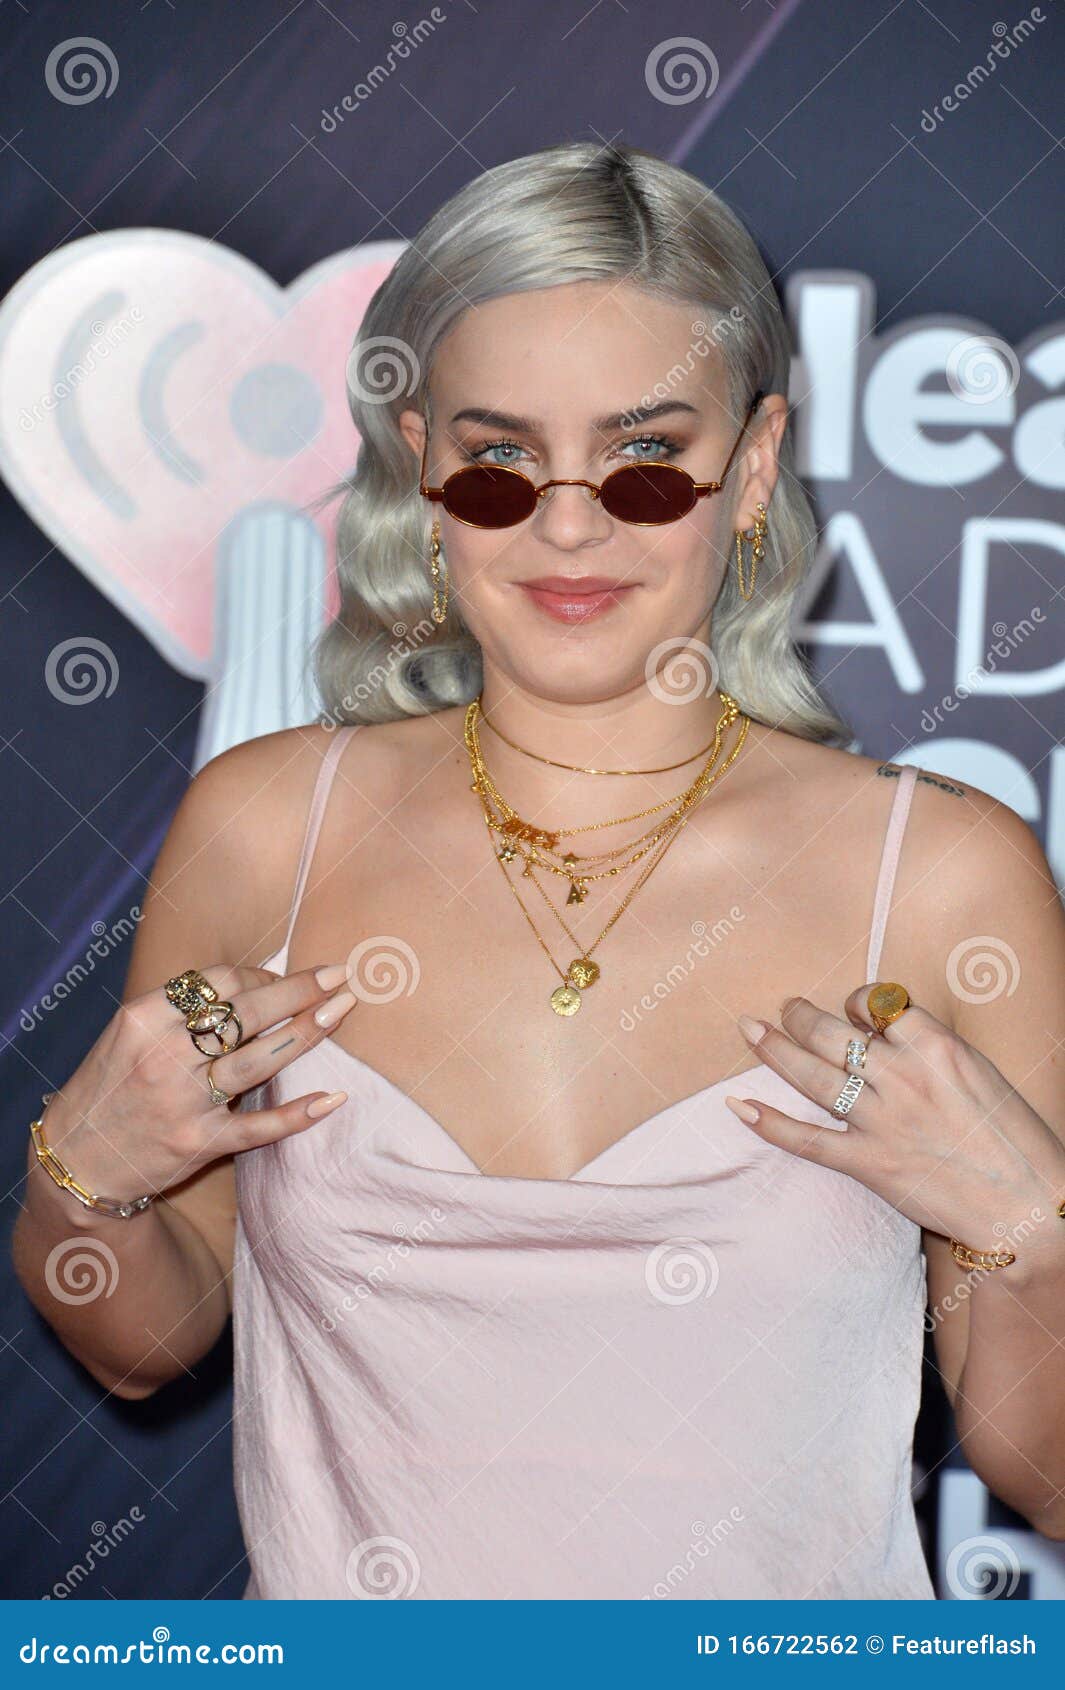 Anne-Marie plays hotel set after Korean show is cancelled | Music |  celebretainment.com